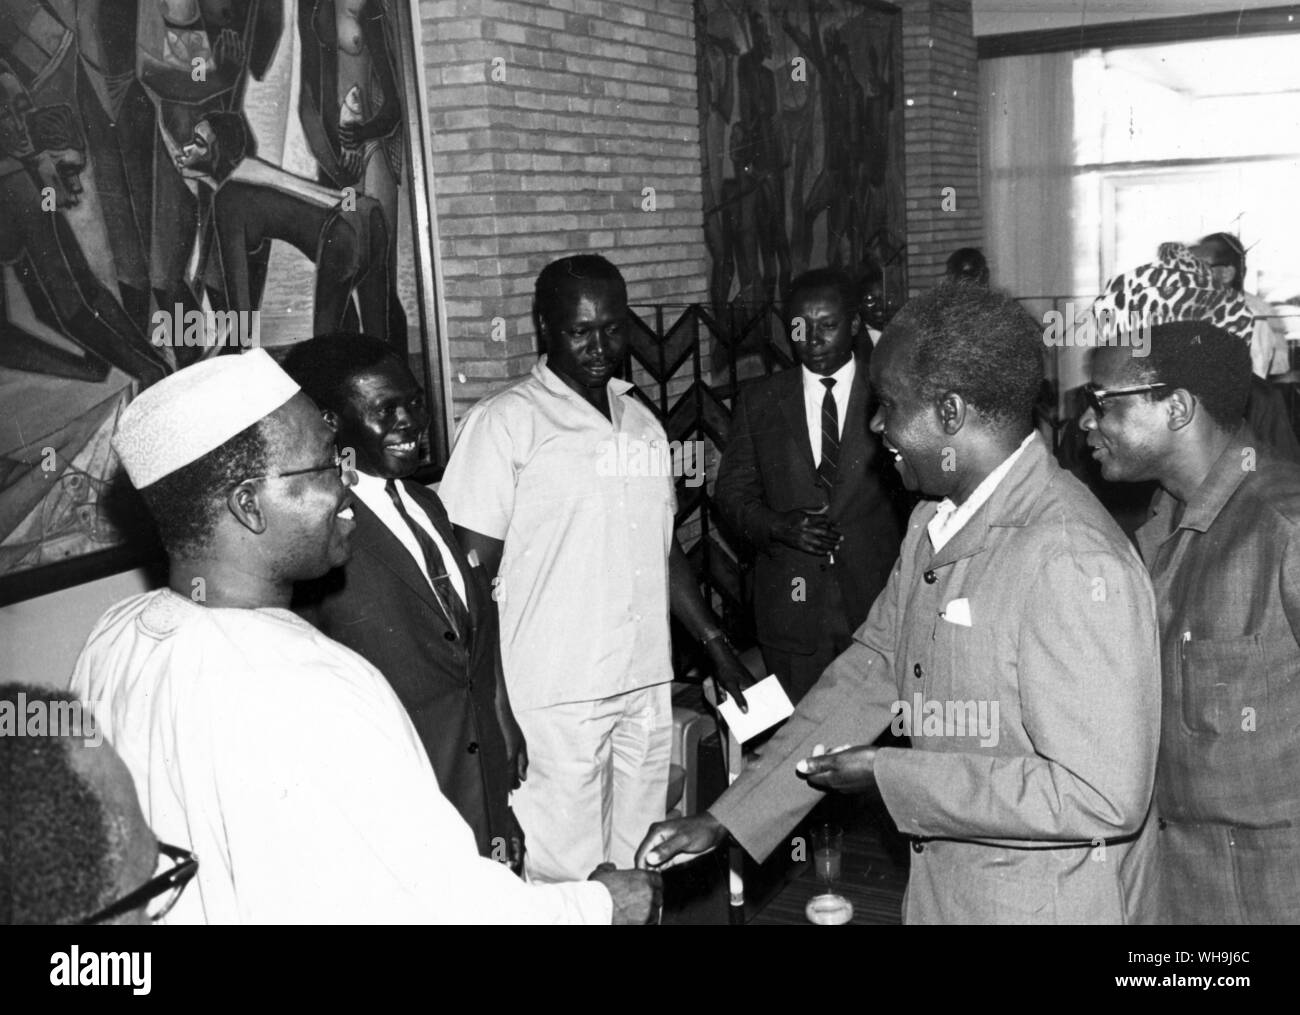 10th September 1967: Zambia President Kenneth Kaunda (2nd right) shakes hands with three heads of state in Kinshas's airport as he arrived to participate in the O.A.U summit conference. l-r: Obafemi Awonowo, Vice-President of the Federal Executive Council of Nigeria: Dr. Milton Obote of Uganda; Kenya Vice-President Arap Mai (dressed in white). Behind Kaunda is Congo President, General Mobutu. Stock Photo